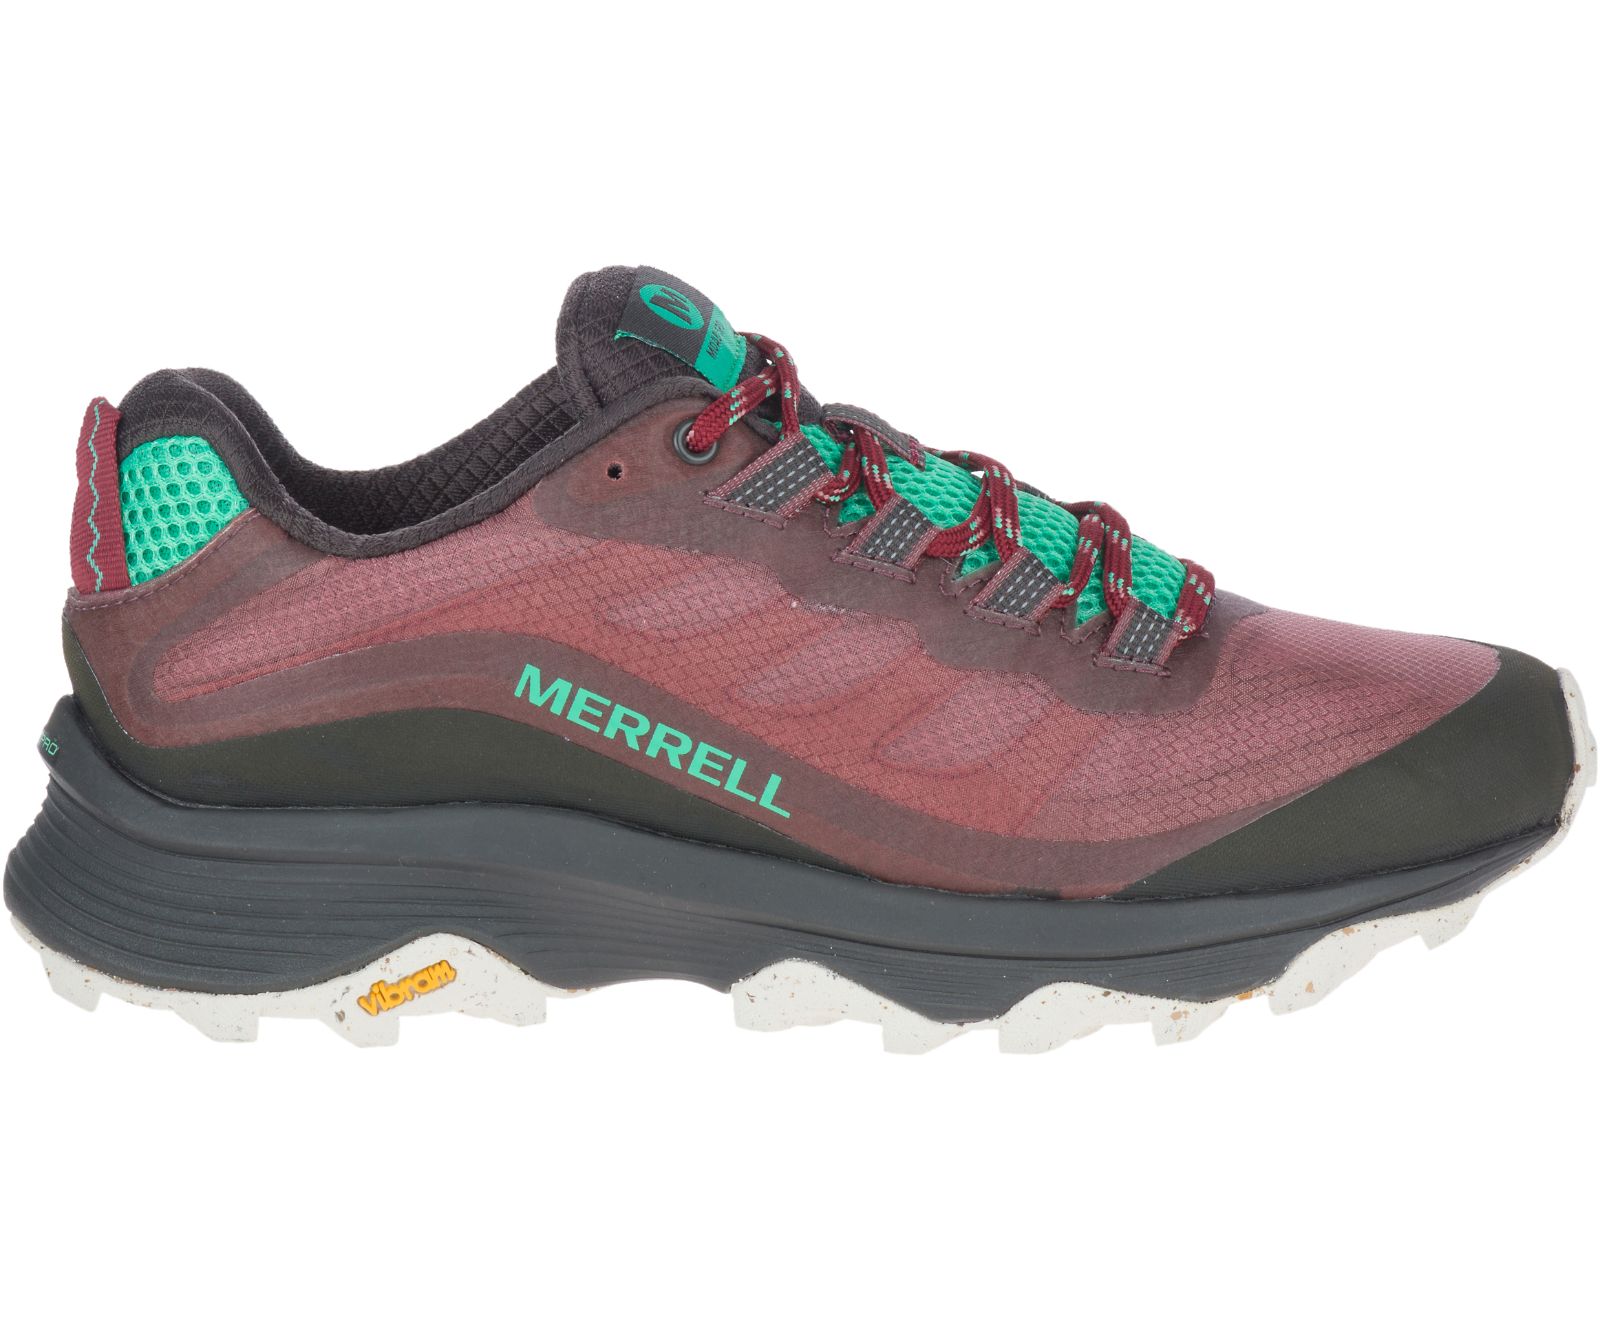 Merrell Moab Speed Hiking Shoes - Women's | Women's Hiking Boots & Shoes |  